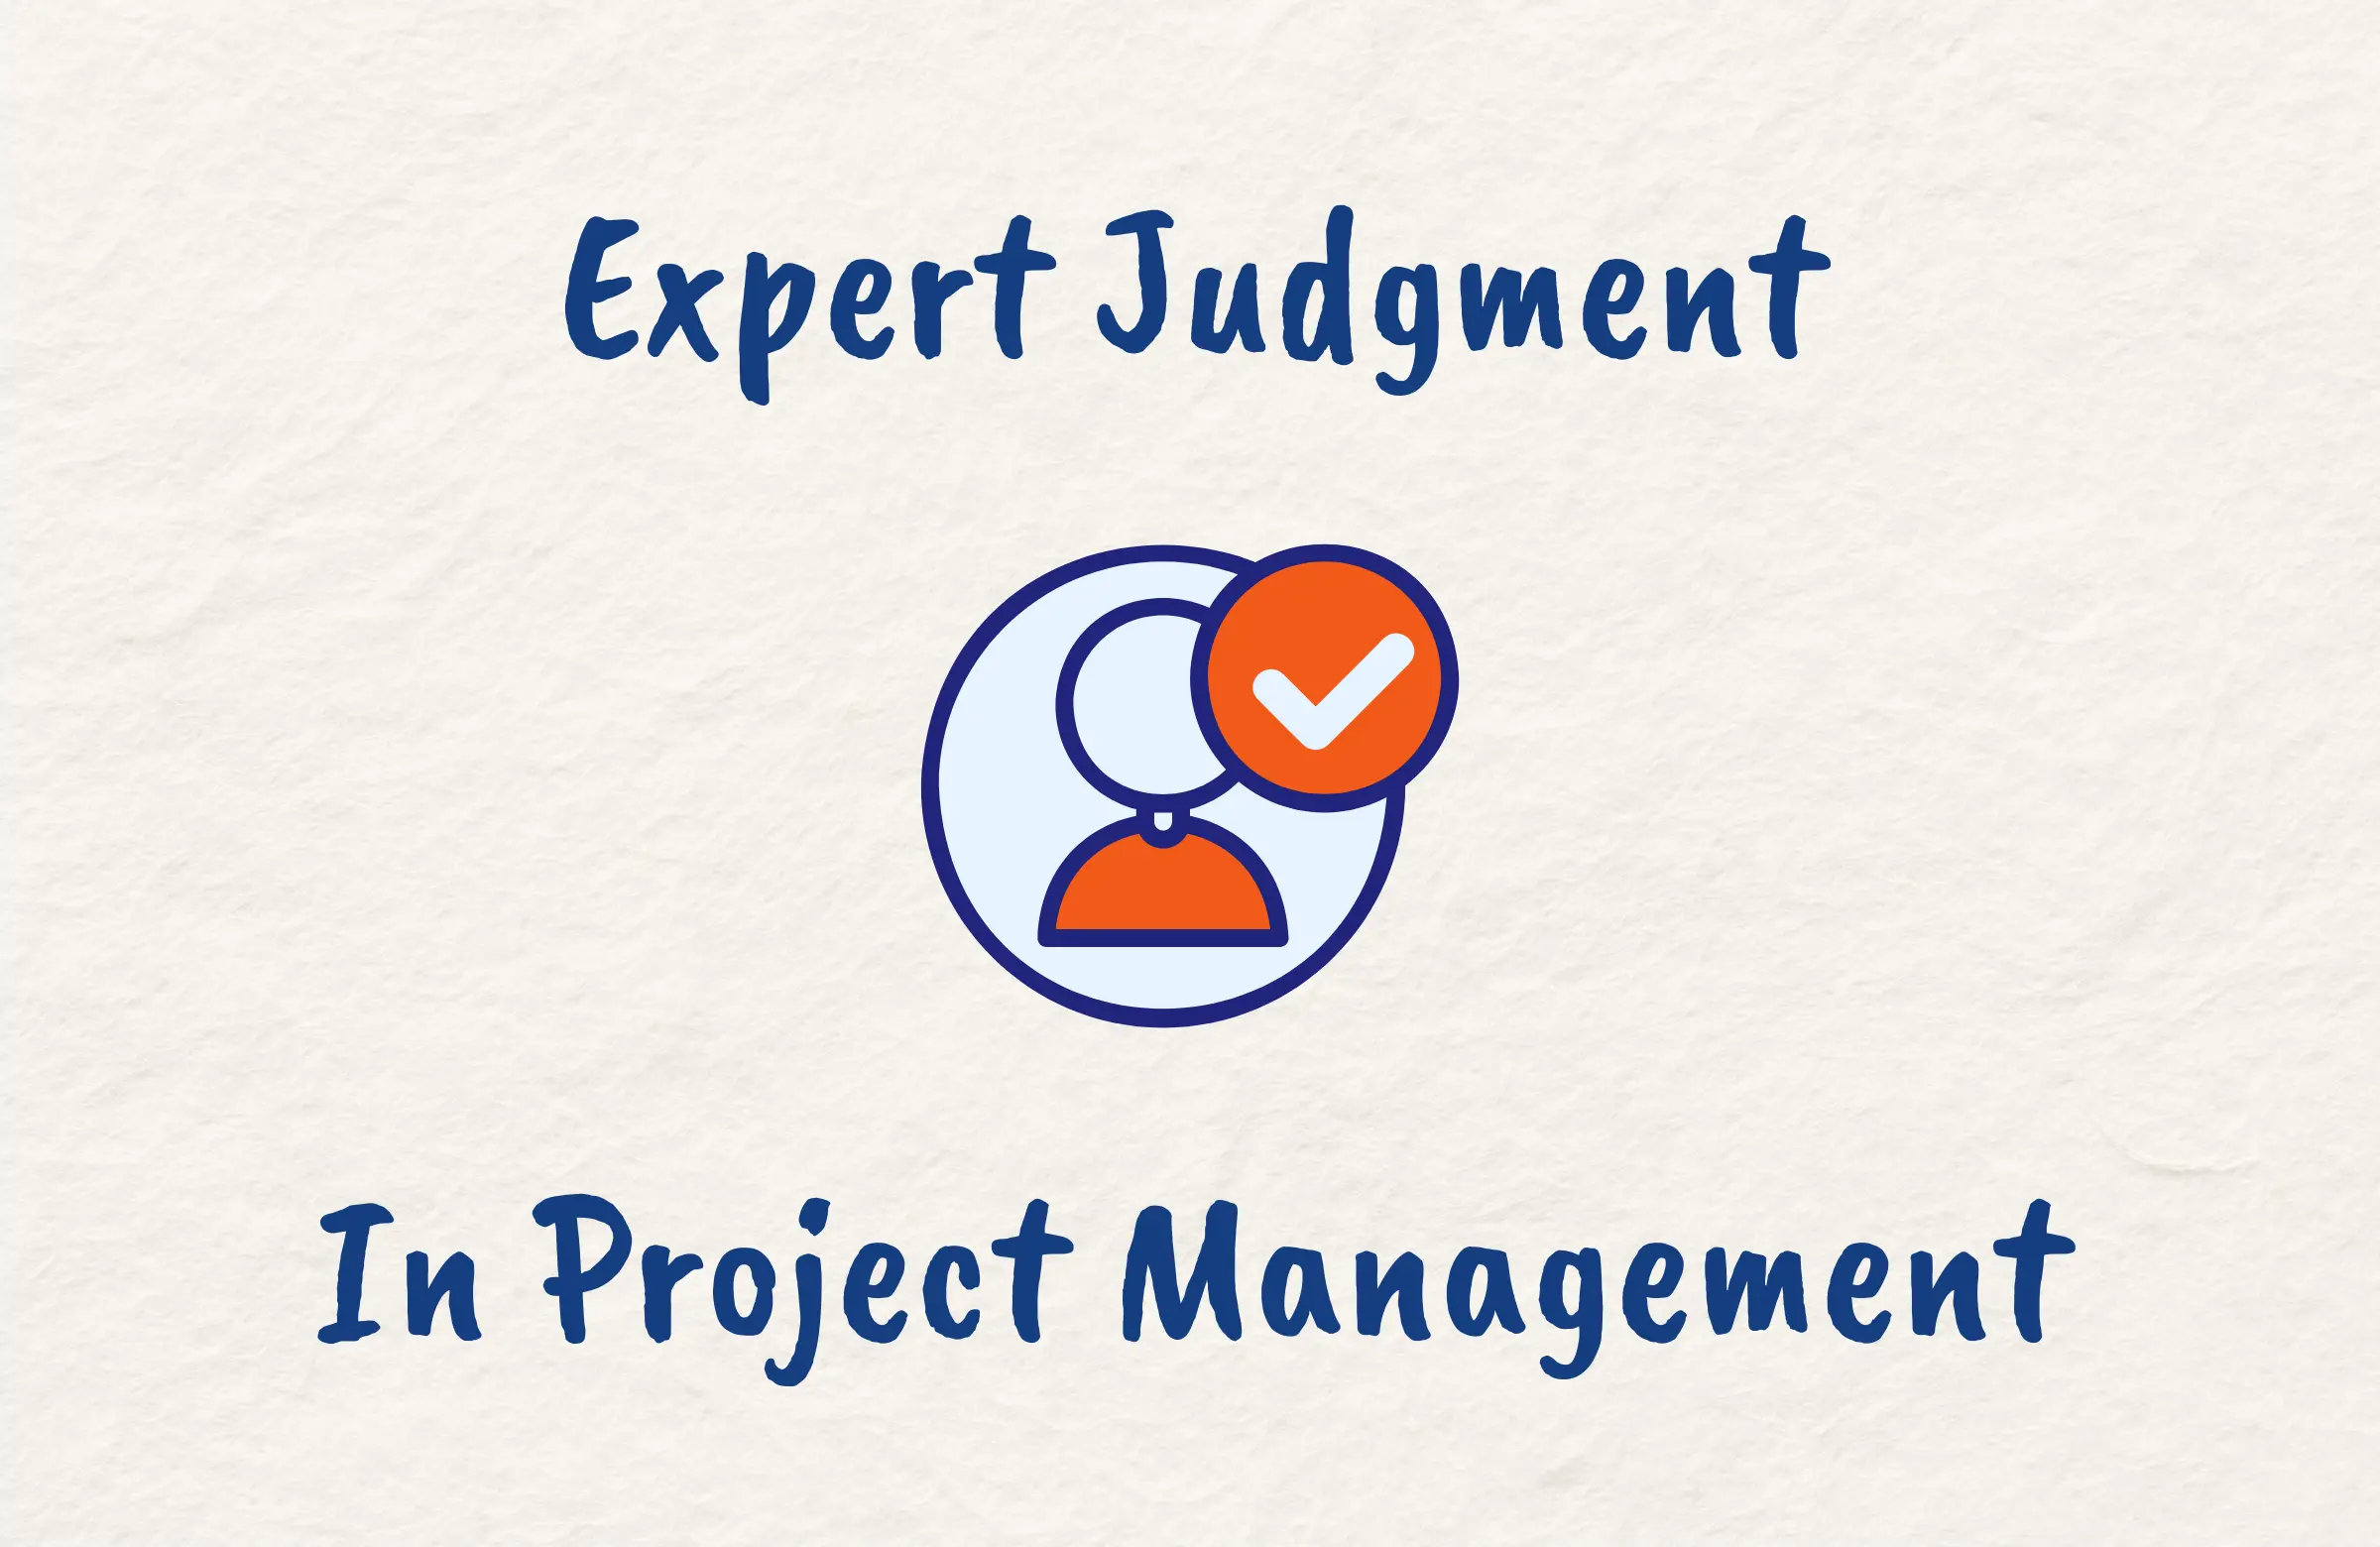 What is Expert Judgment in Project Management